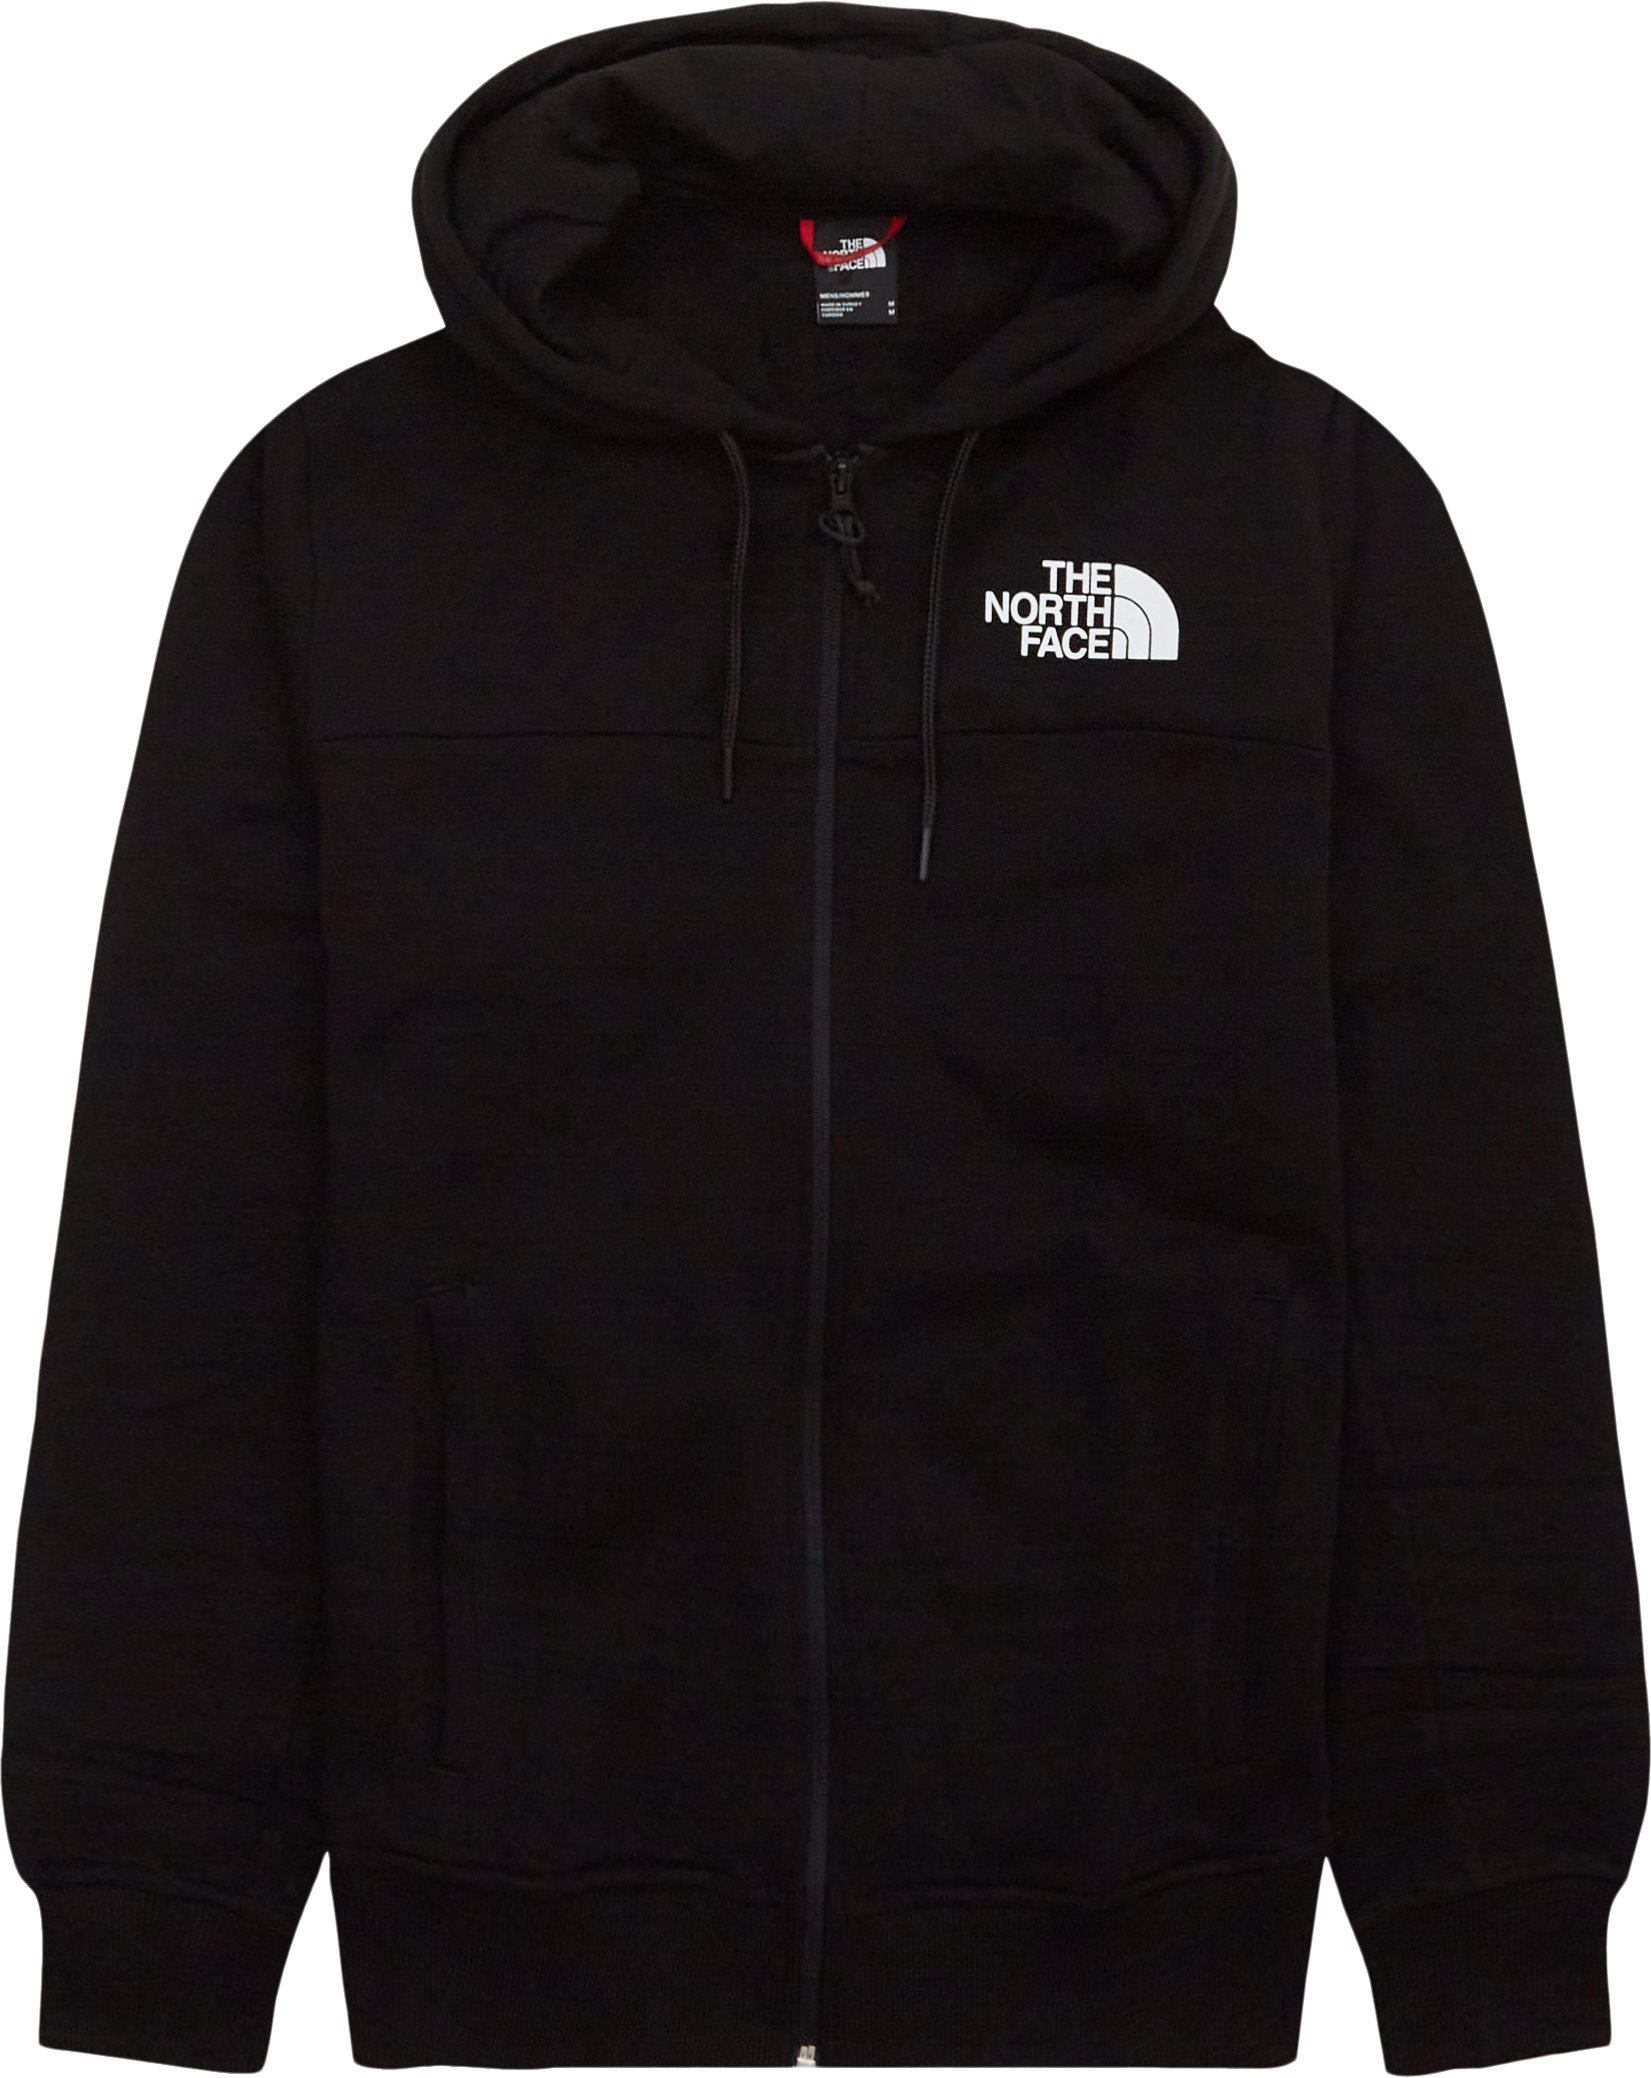 The North Face Sweatshirts ICON FULL ZIP NF0A7X1YJK31 Sort